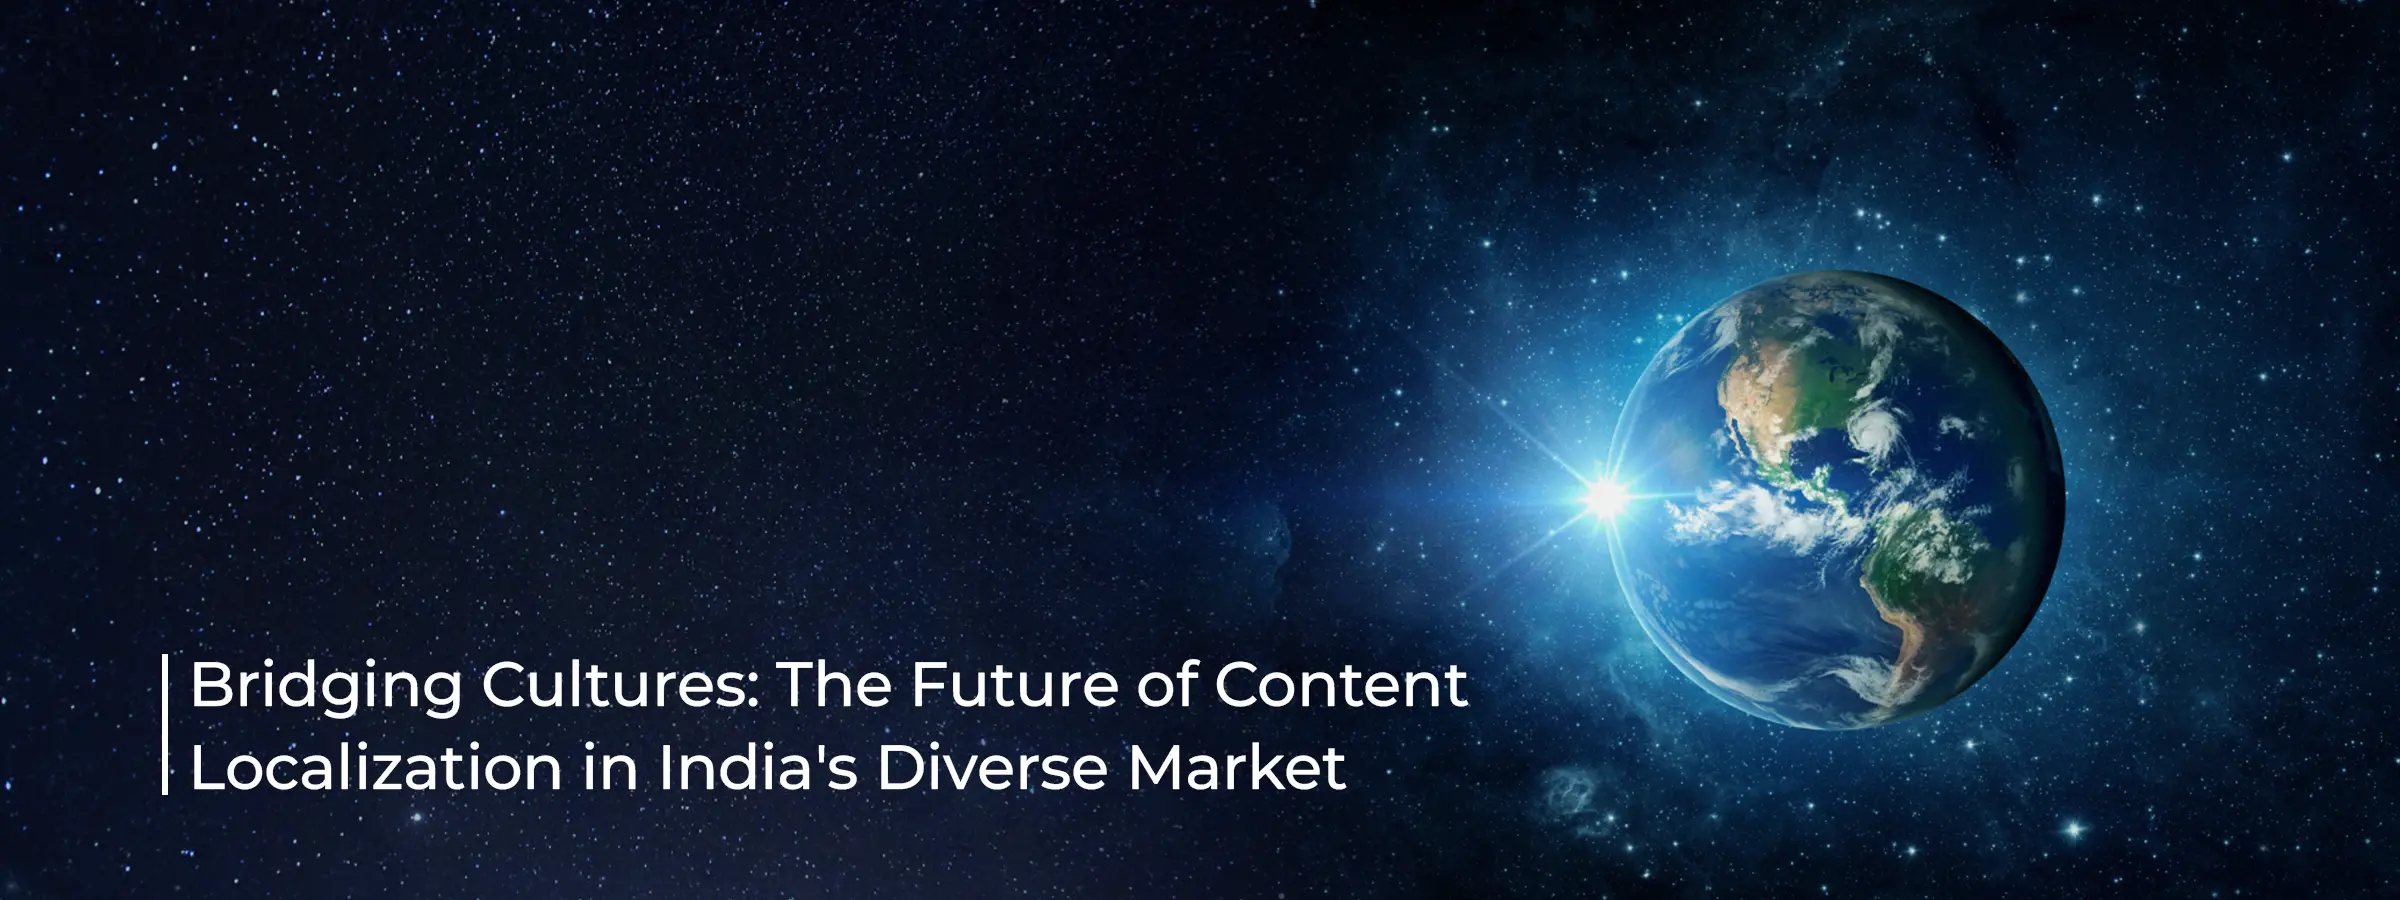 content-localization-in-india's-diverse-market